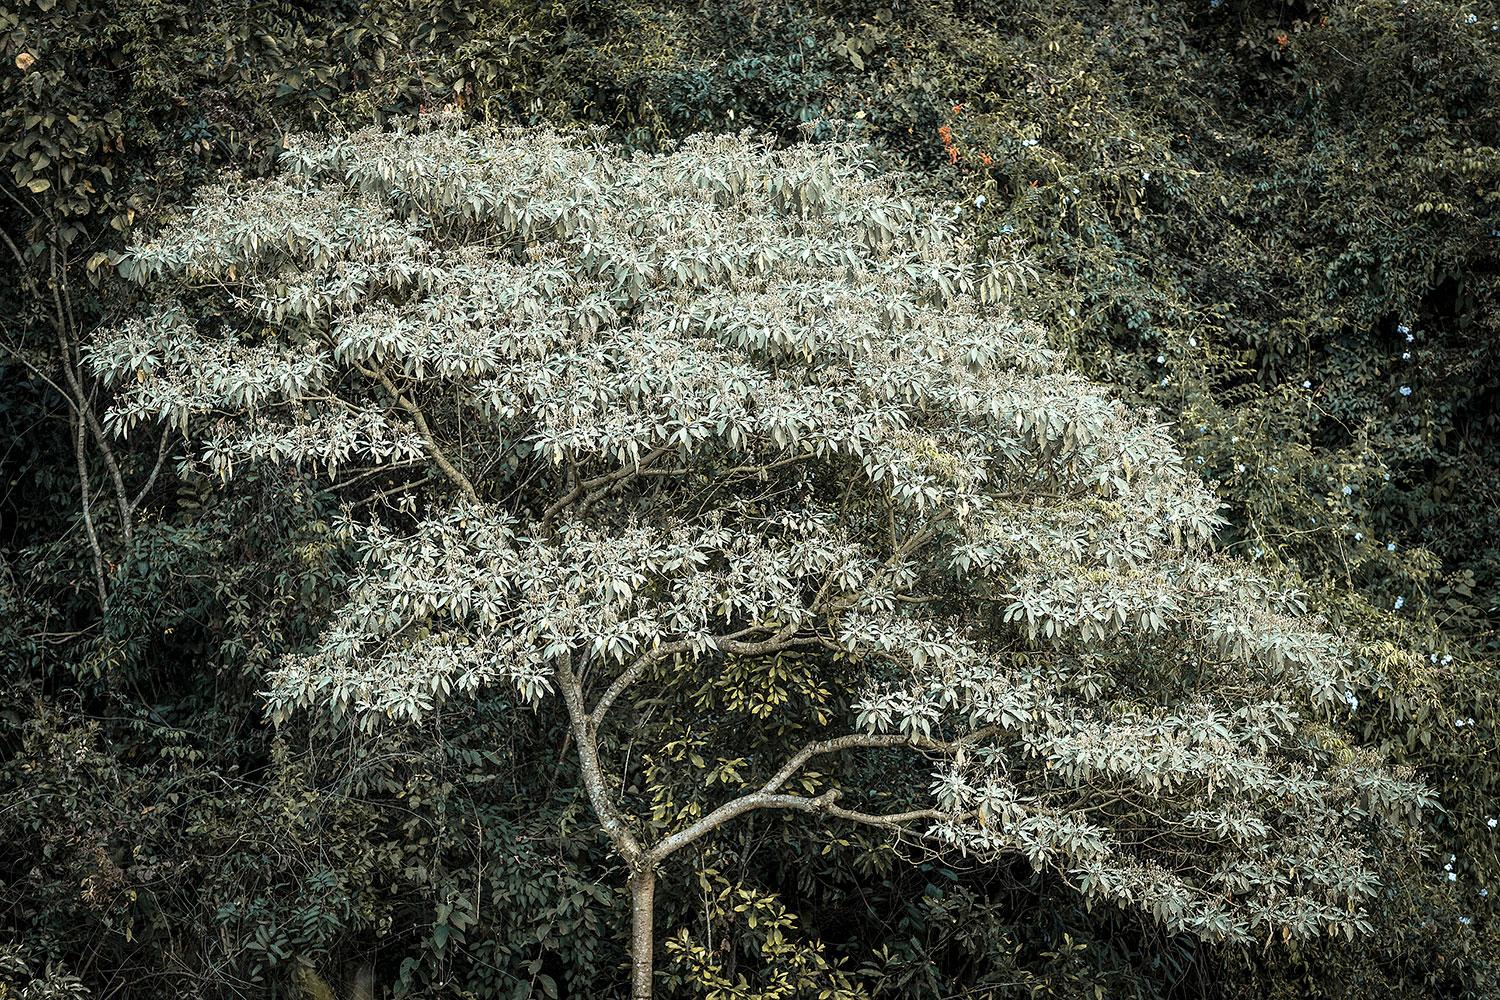 Daniel Mansur
Brumadinho Tree, 2015

40 x 60 inches 
100 x 150cm

Also available in:

47 x 71 inches 
120 x 180cm

60 x 88.5 inches
150 x 225 cm

Edition of 6 copies overall

Archival Pigment Print
Signature Label. Signed, titled, numbered and dated